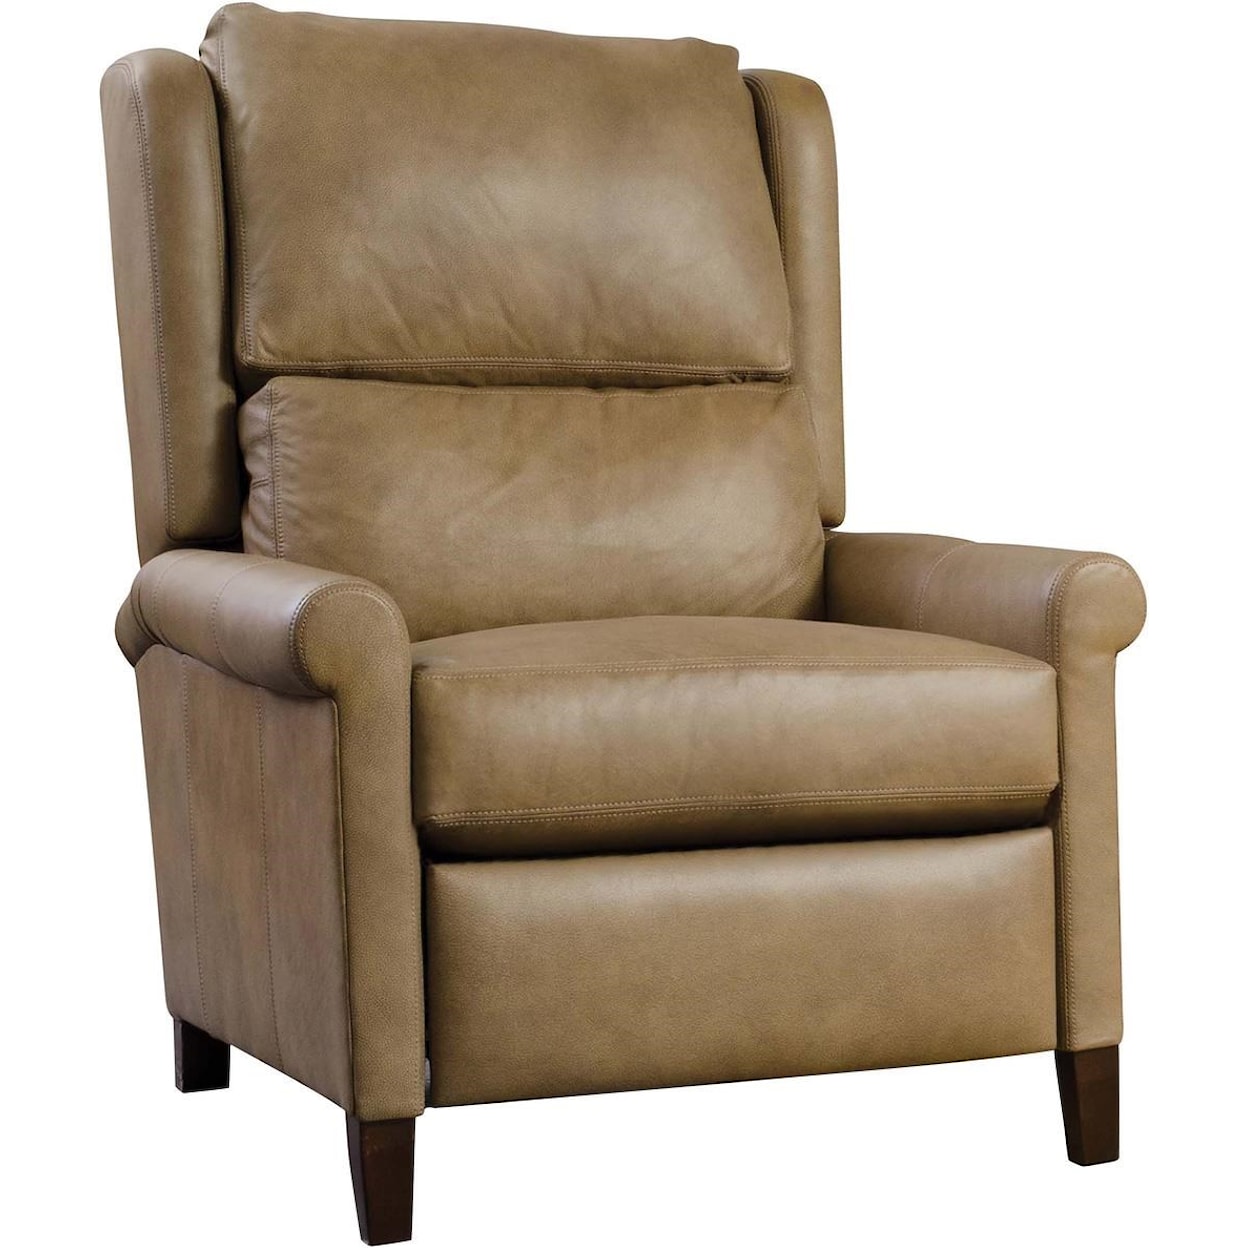 Stickley Woodlands Woodlands Leather Chair